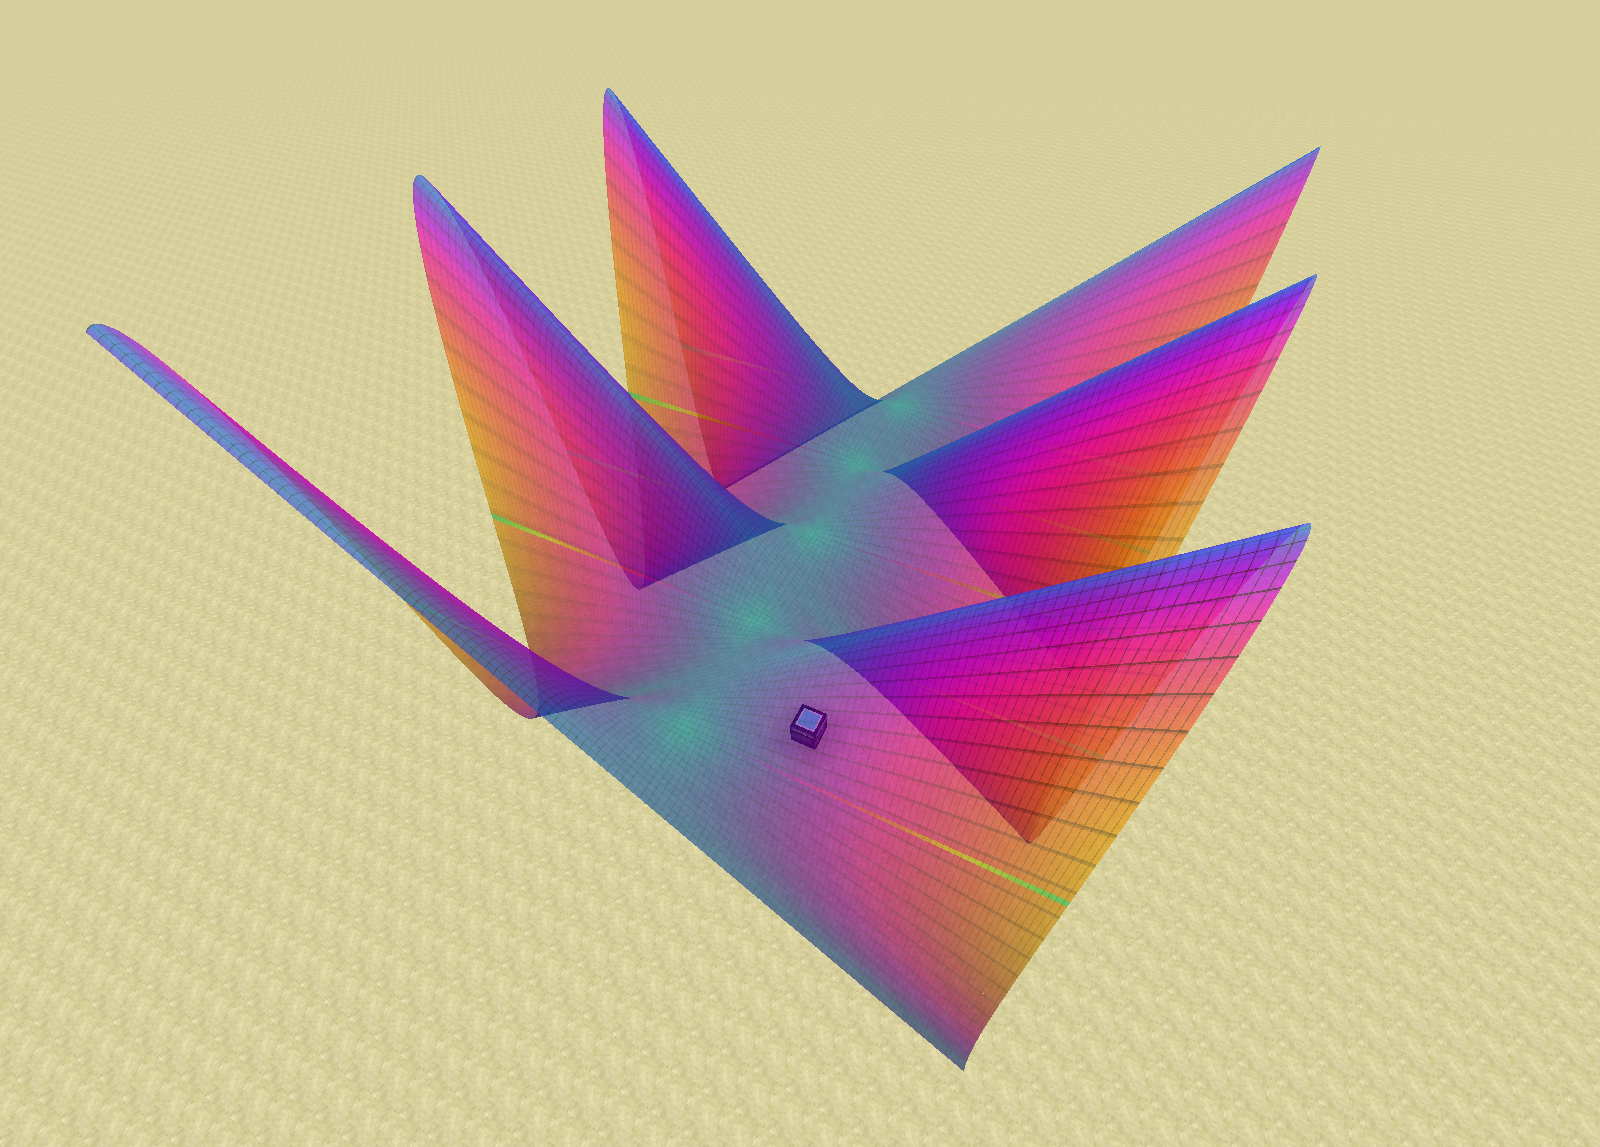 Trig function with slope coloring, in Cartesian